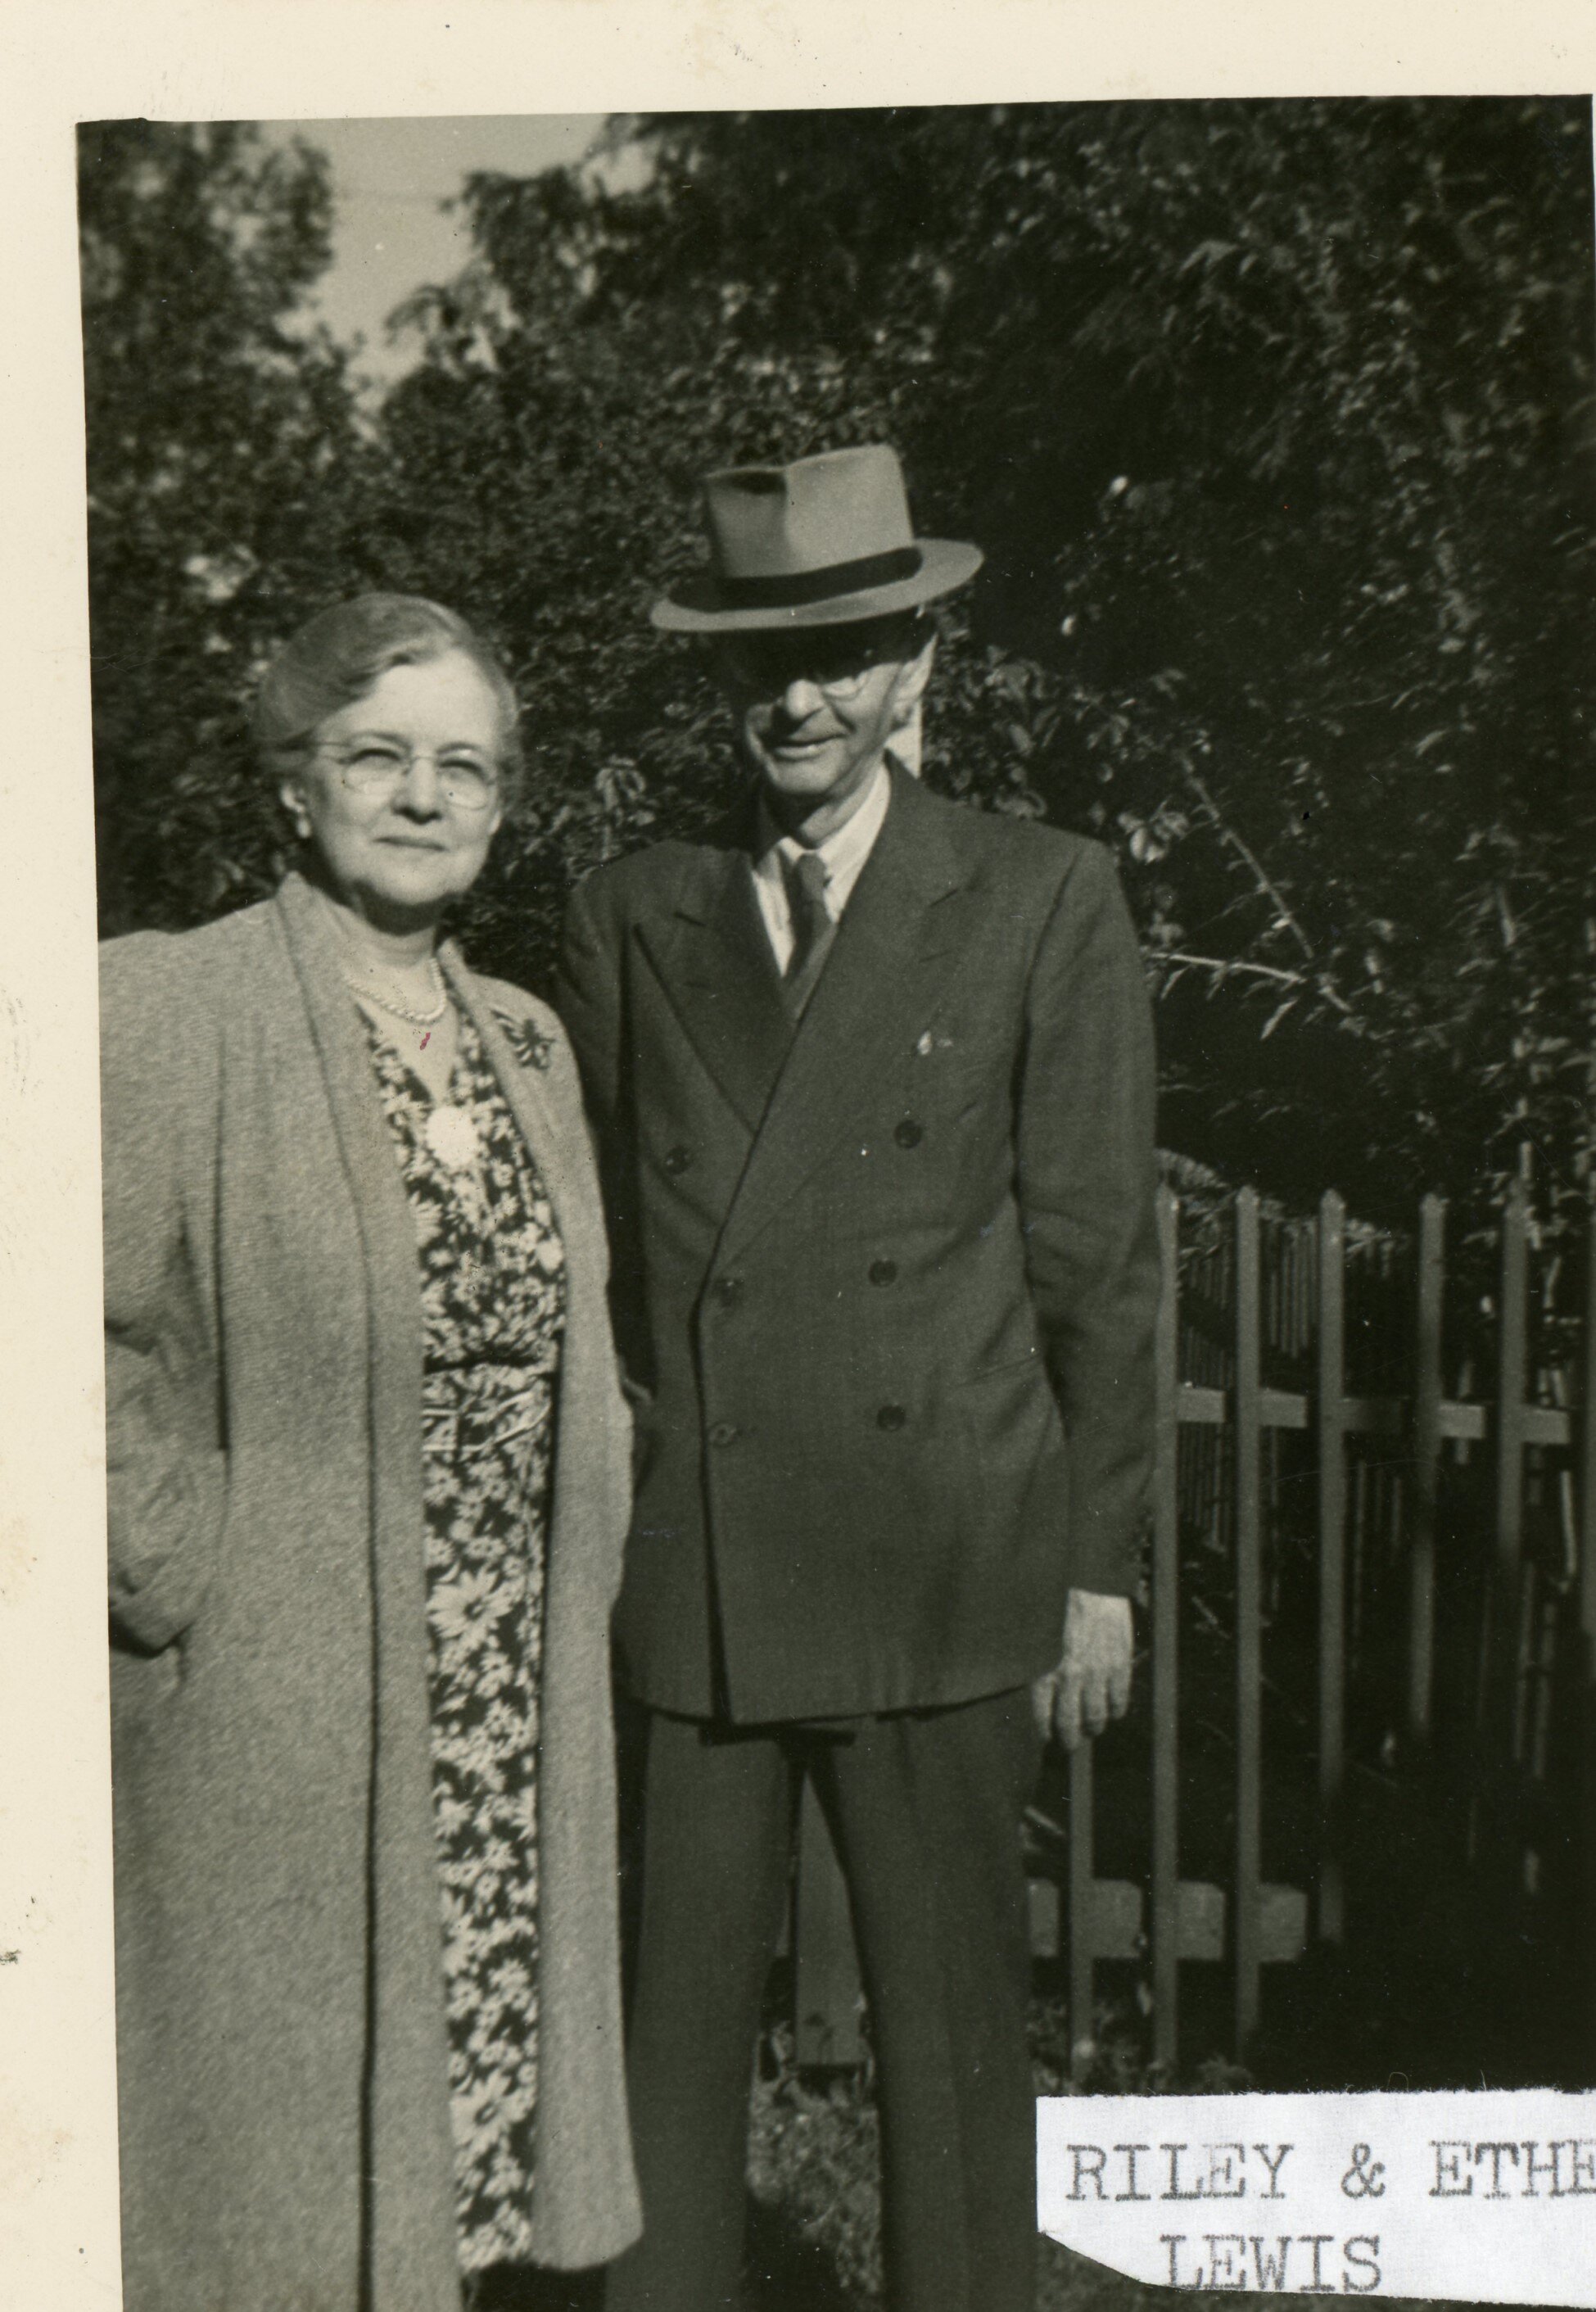 Ethel and Riley Lewis, 1943. Picture probably taken in D. C.